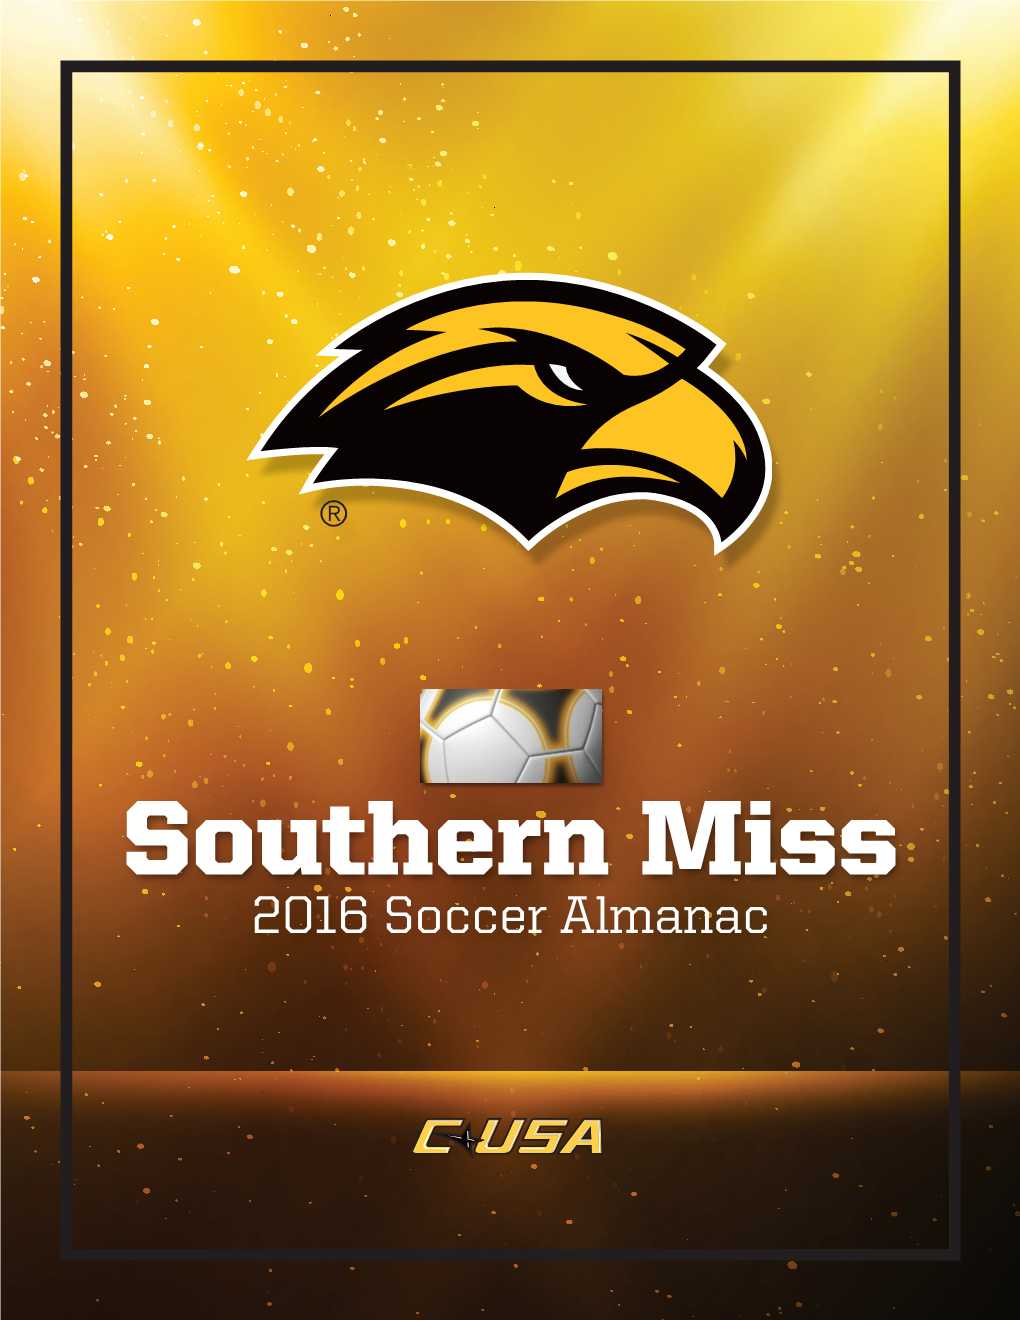 Southern Miss 2016 Soccer Almanac Quick Facts